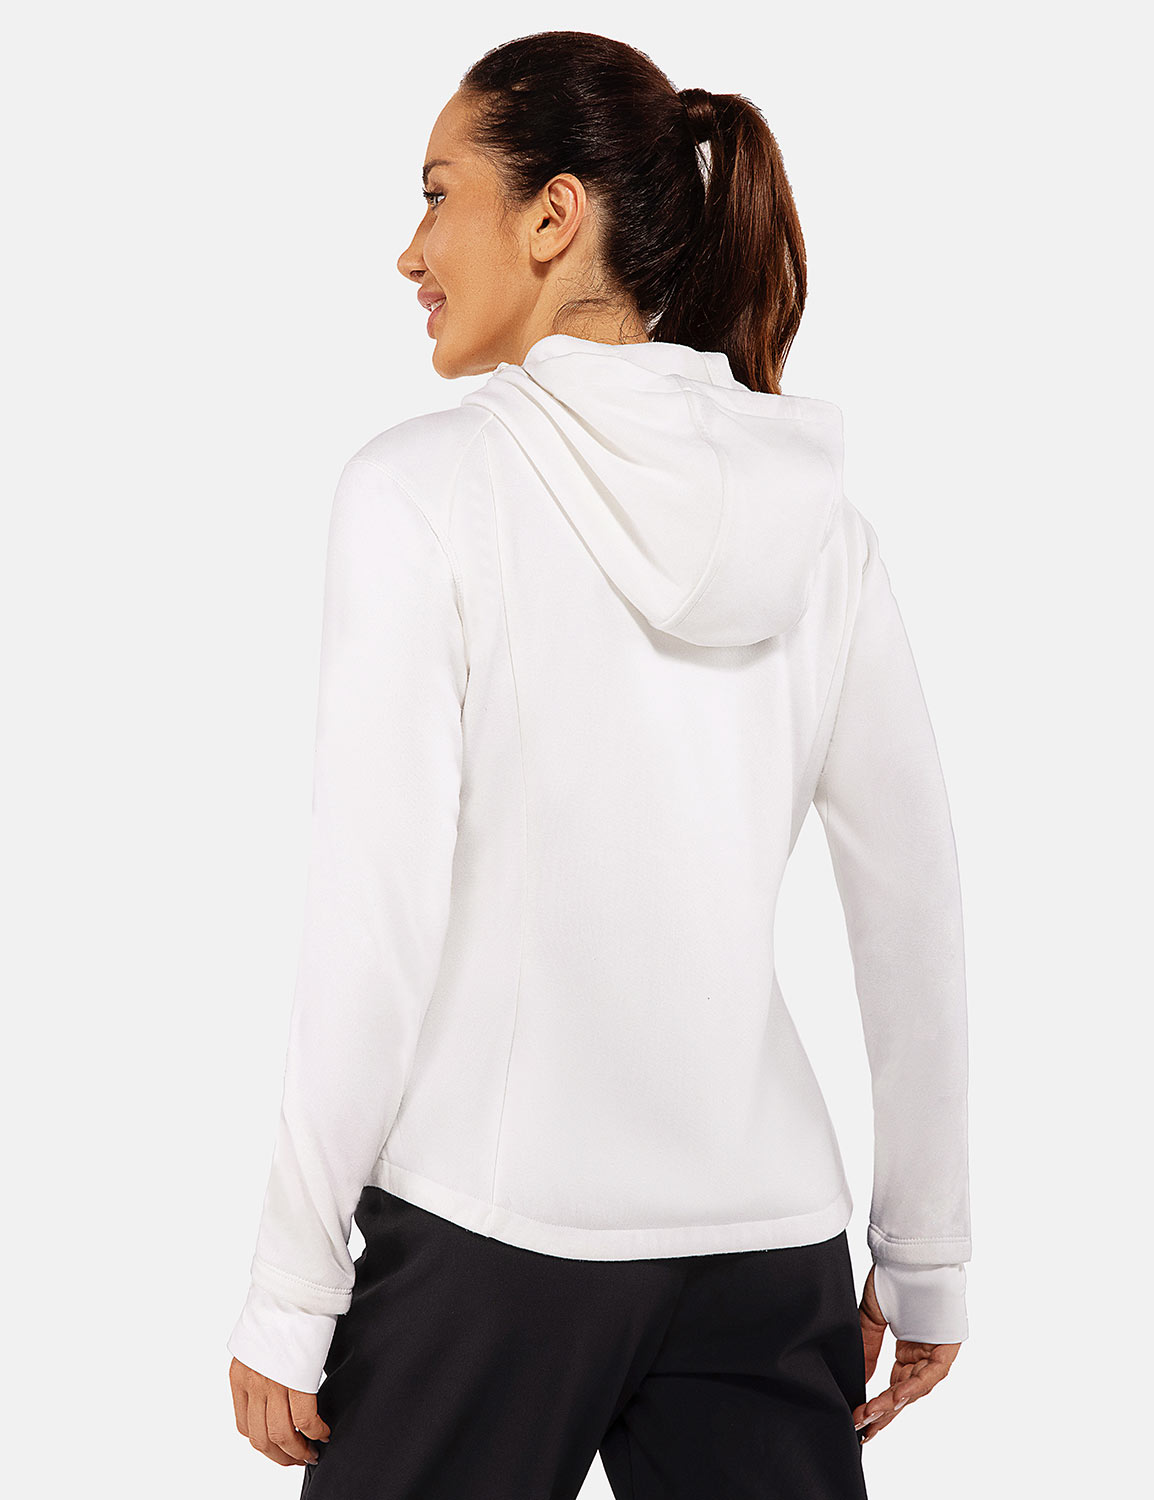 Baleaf Women's Triumph Thermal Water-Resistant Hooded Jacket cga030 Star White Back